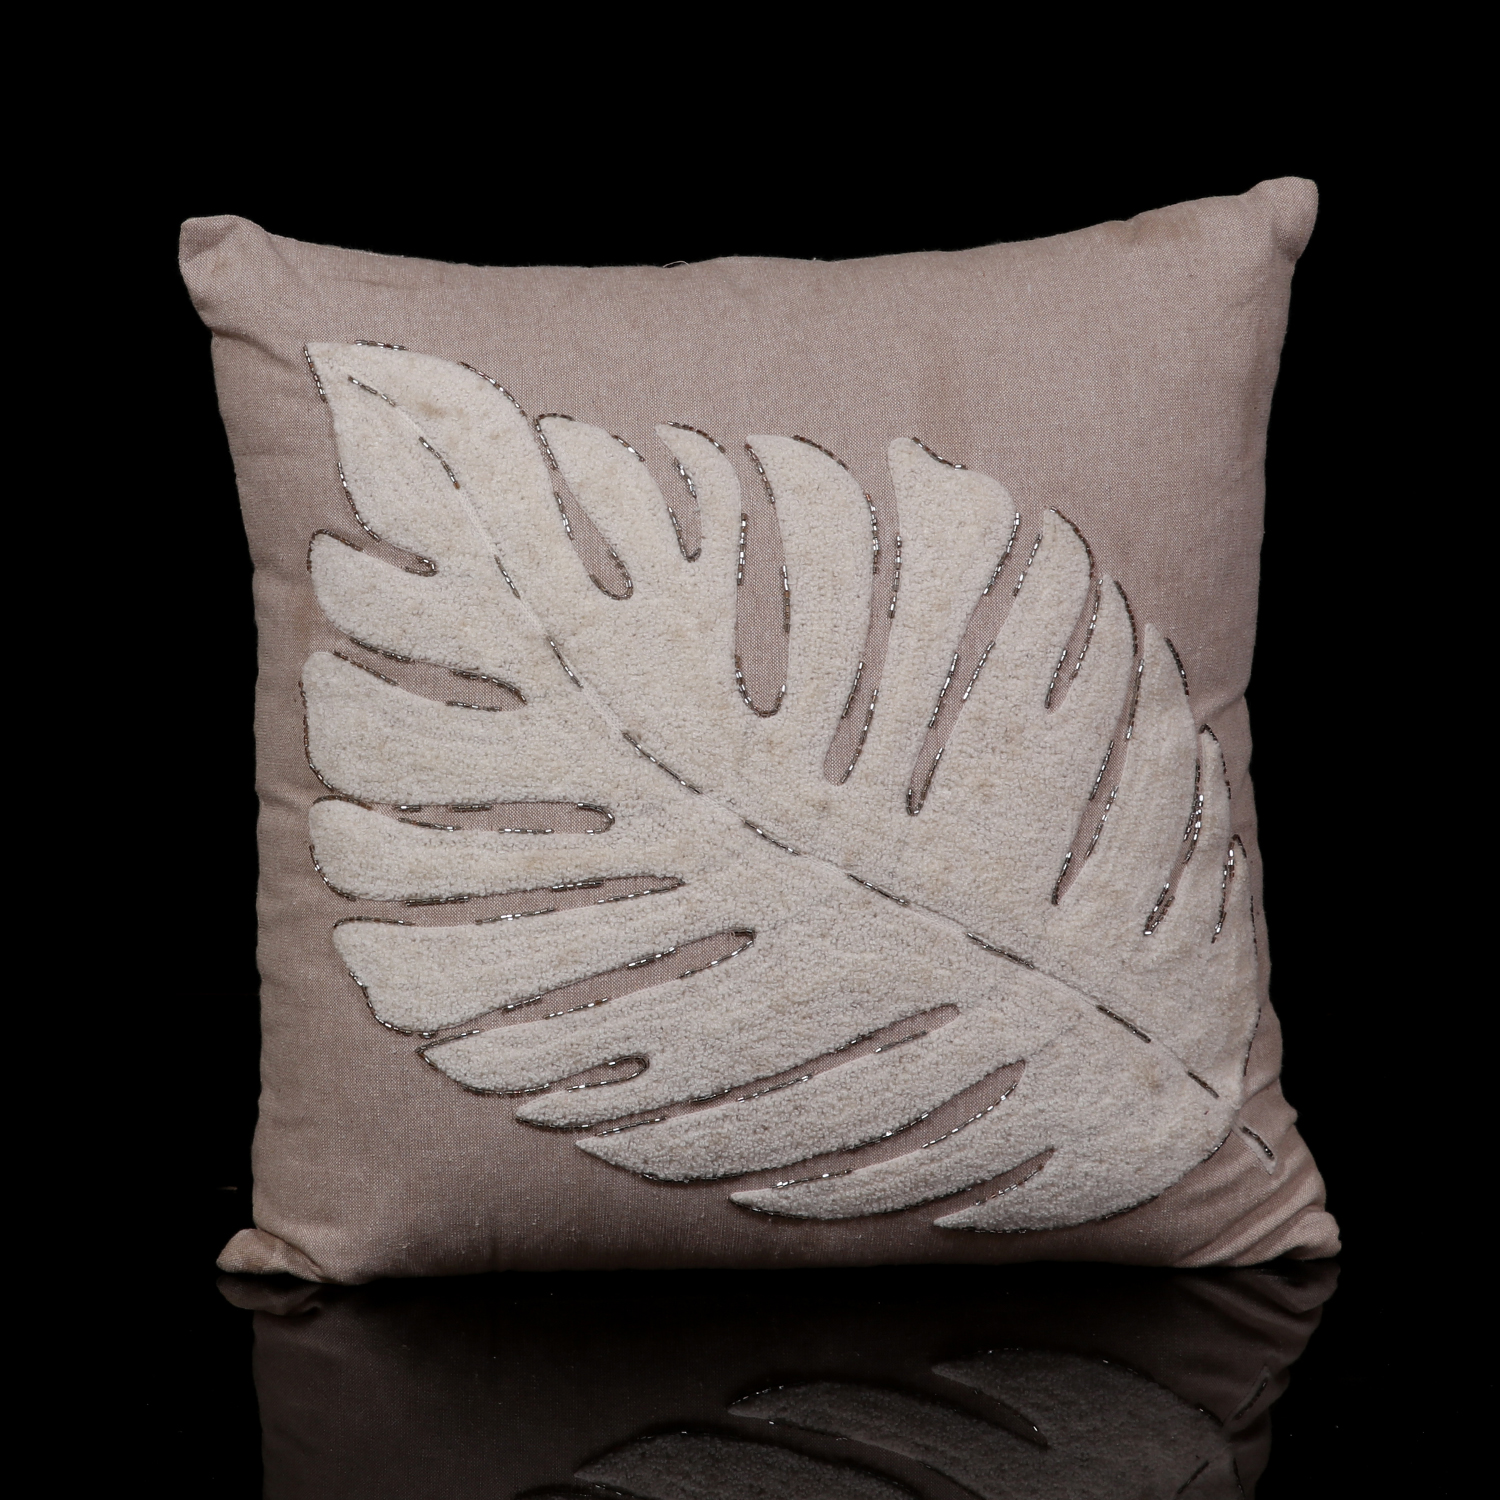 EMBROIDERED LEAF DEISGN PILLOW EMBELLISHED WITH BEADS